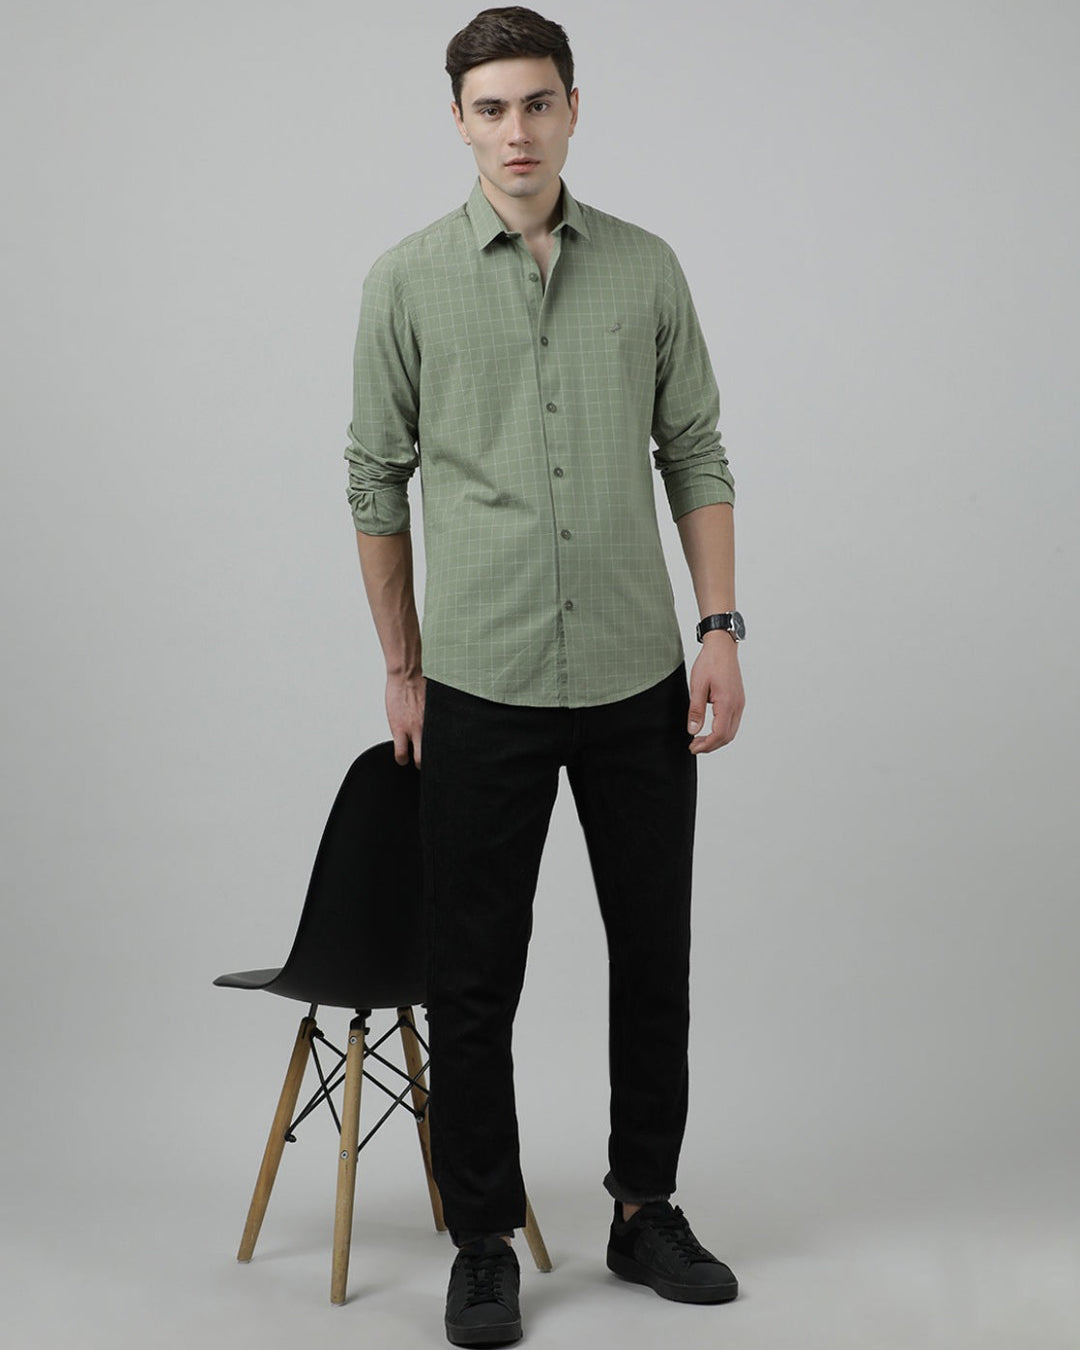 Crocodile Casual Full Sleeve Slim Fit Checked Shirt Olive for Men